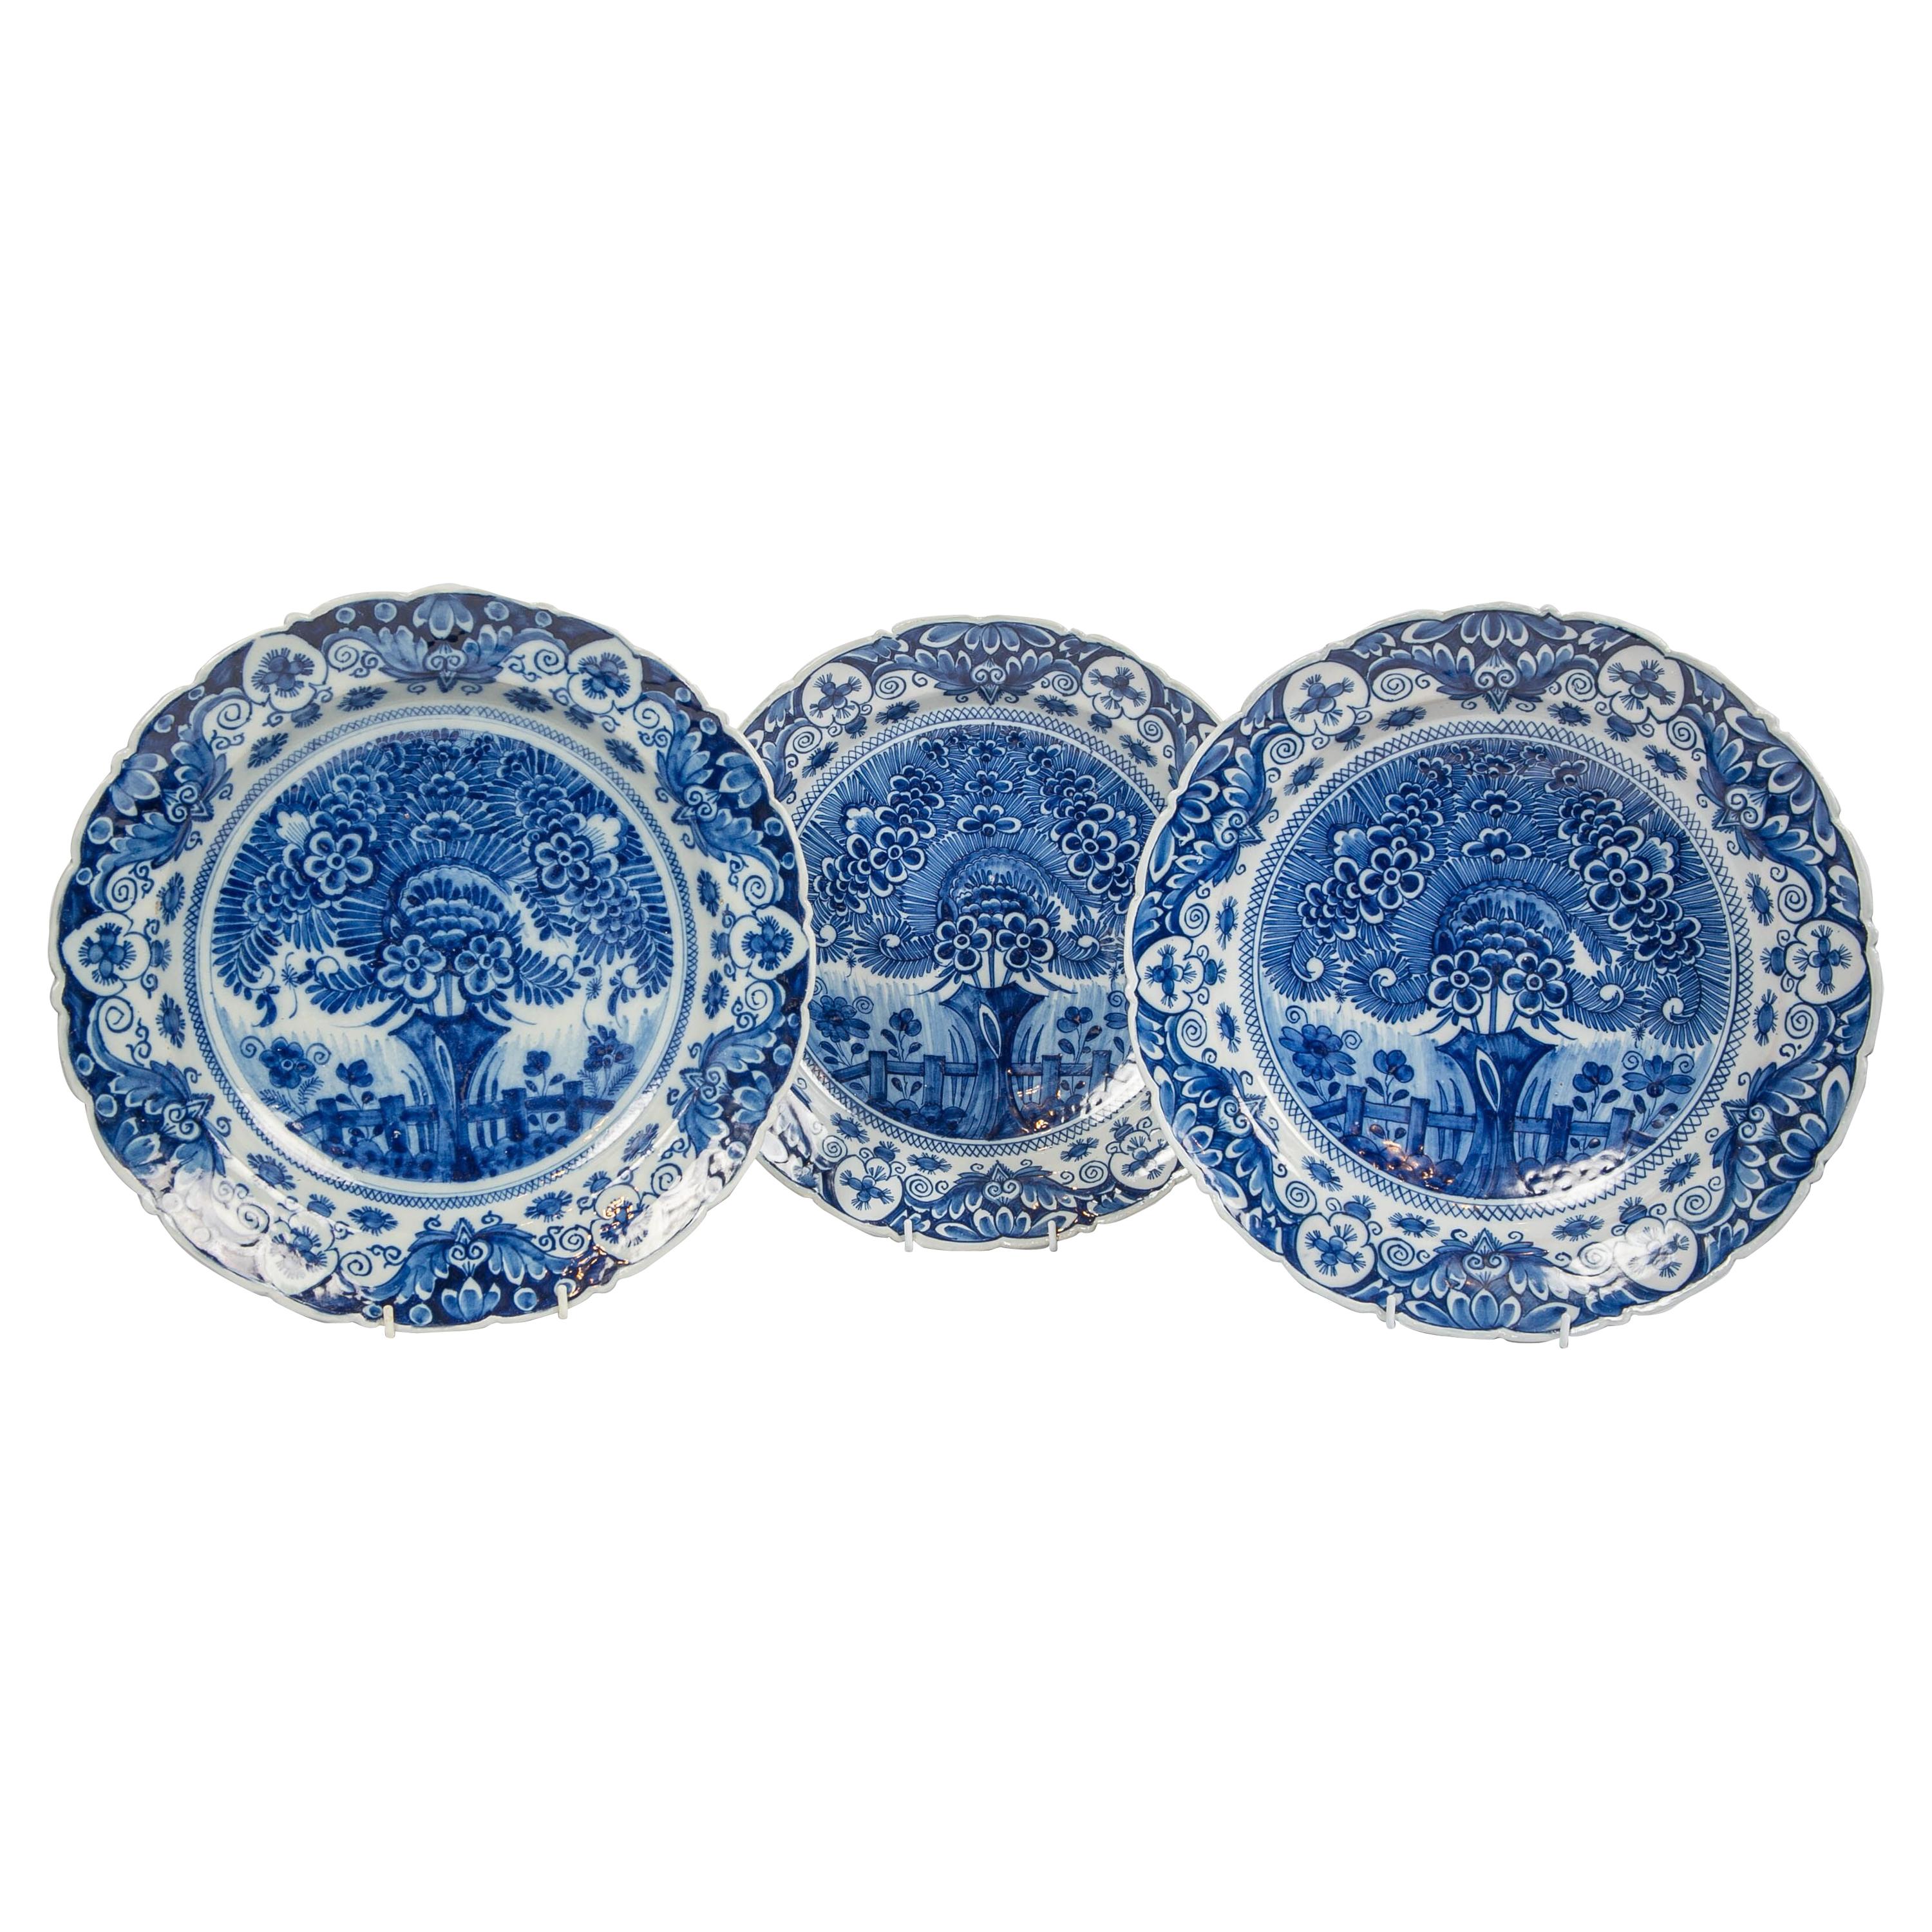 Set of Three Delft Blue and White Theeboom Pattern Chargers